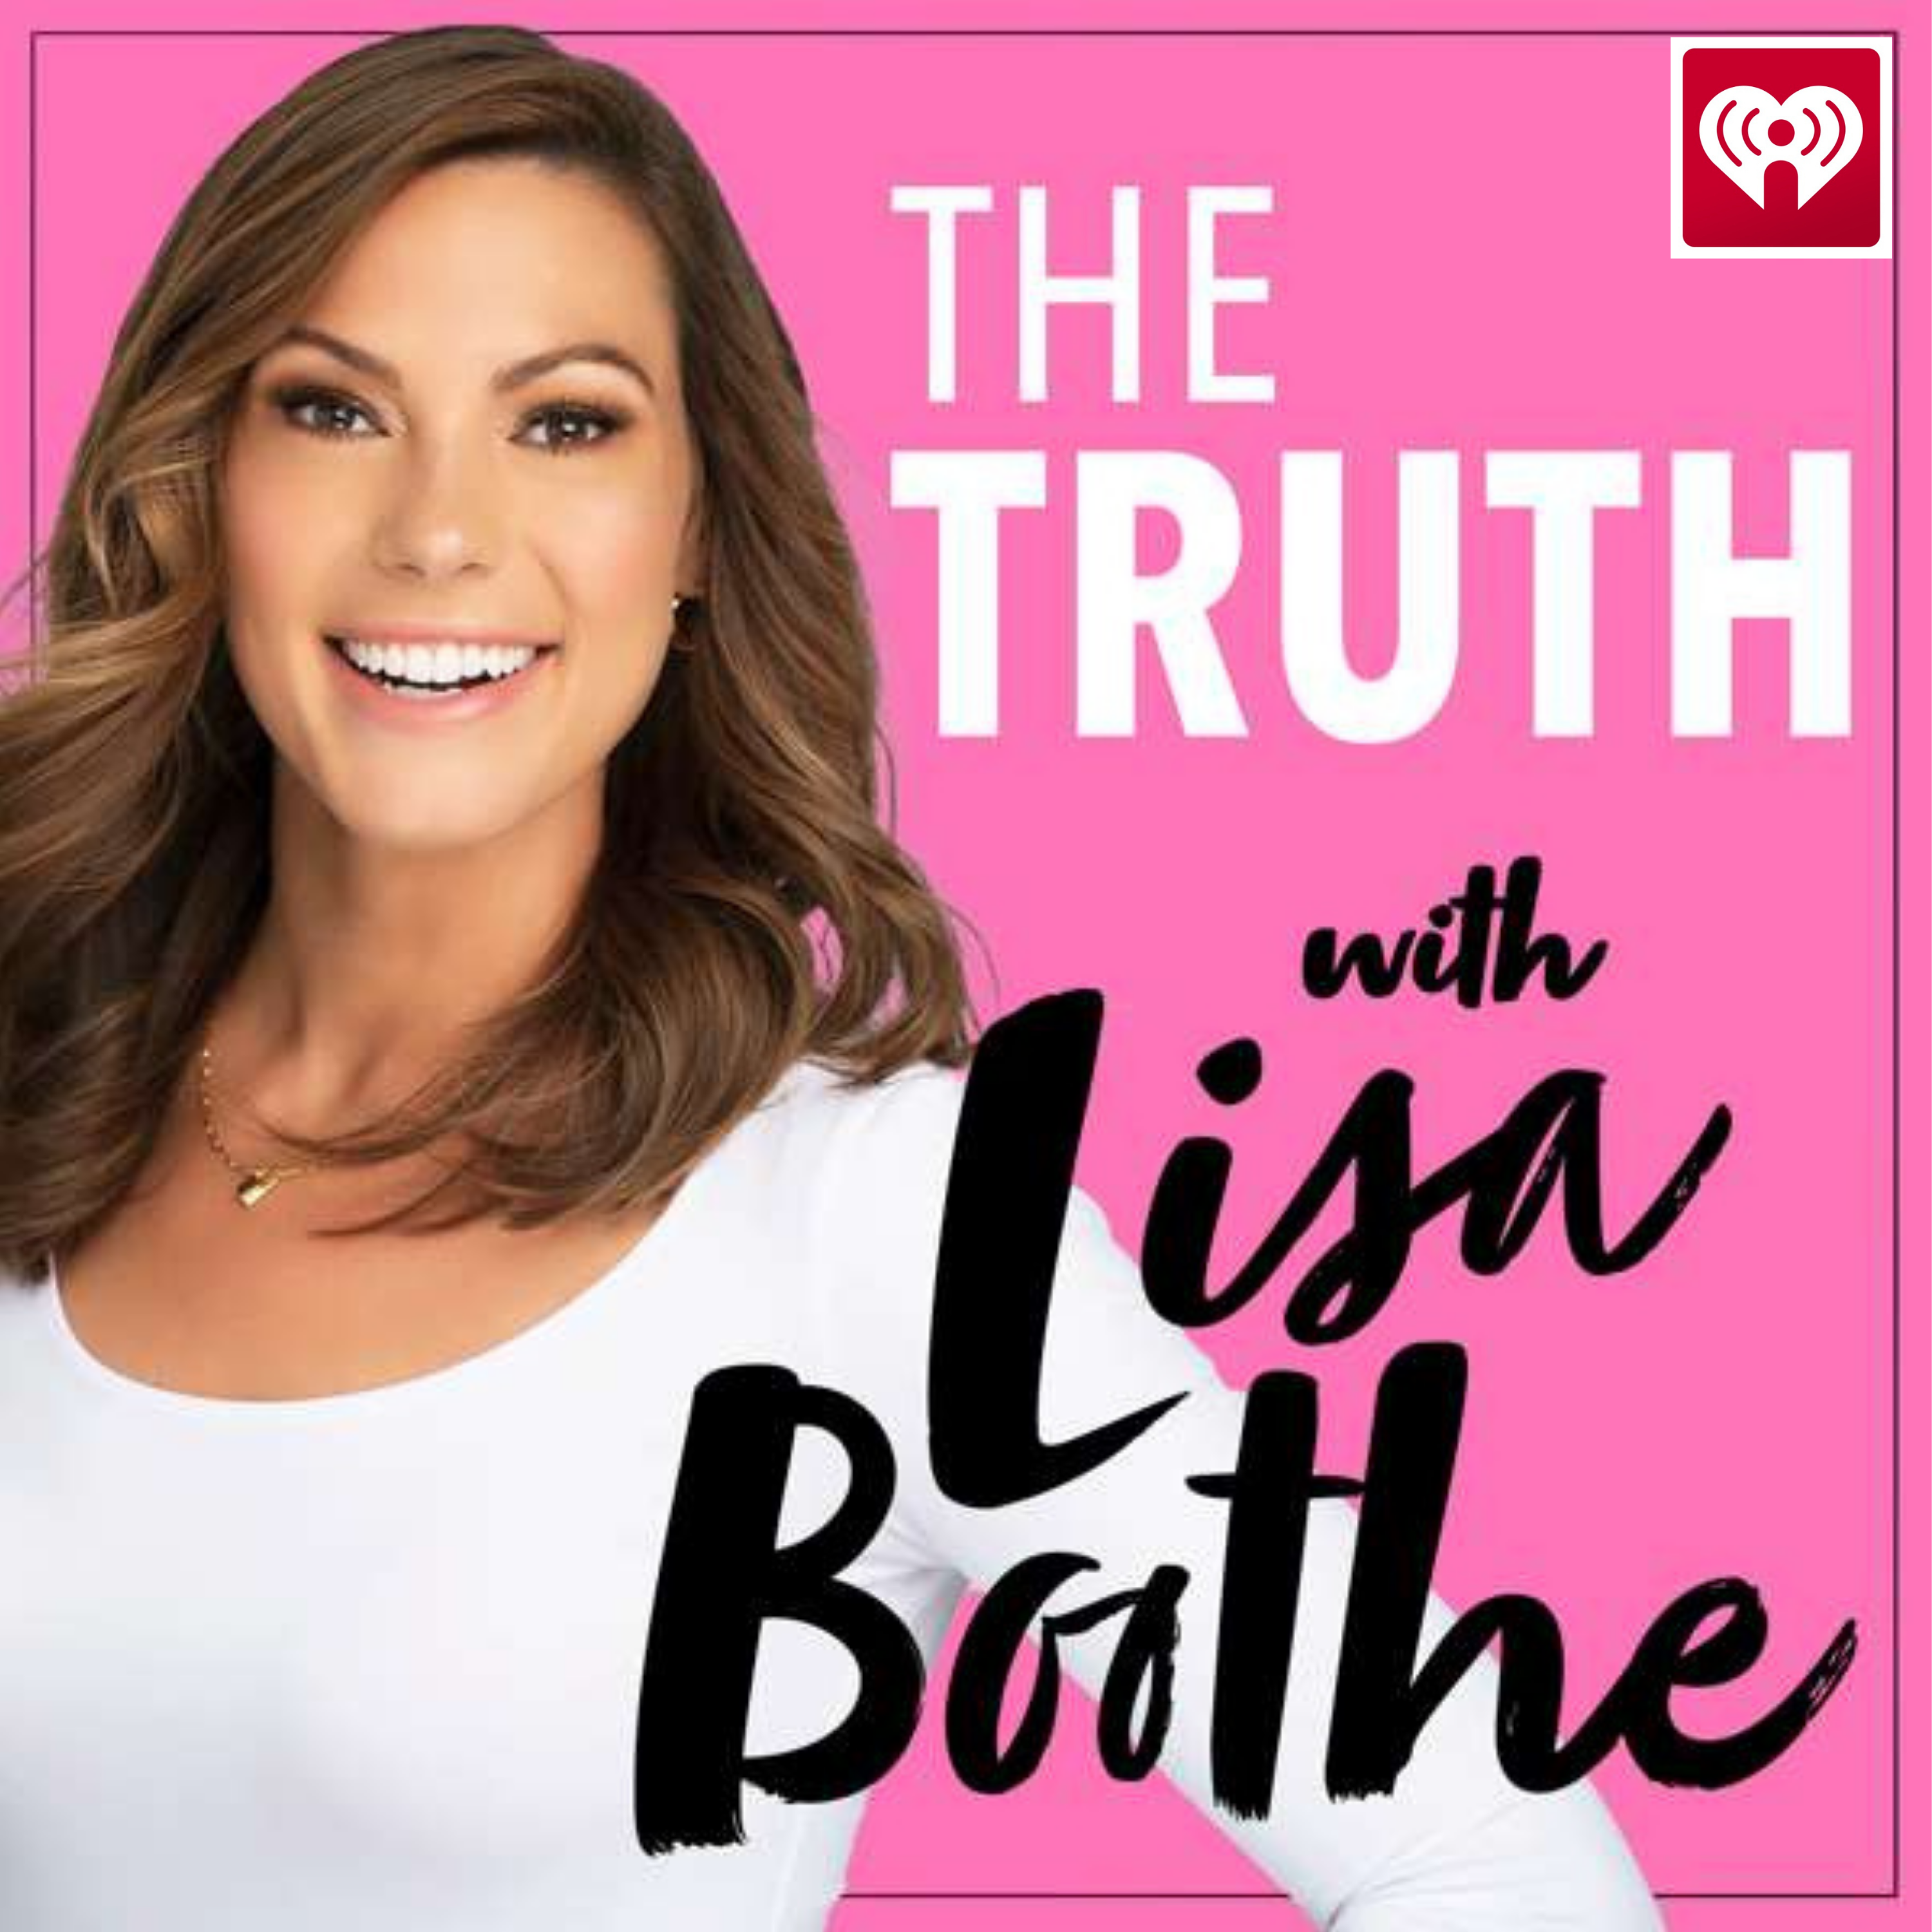 The Truth with Lisa Boothe: A Gold Star Mother’s Quest for Justice in the Afghanistan Withdrawal